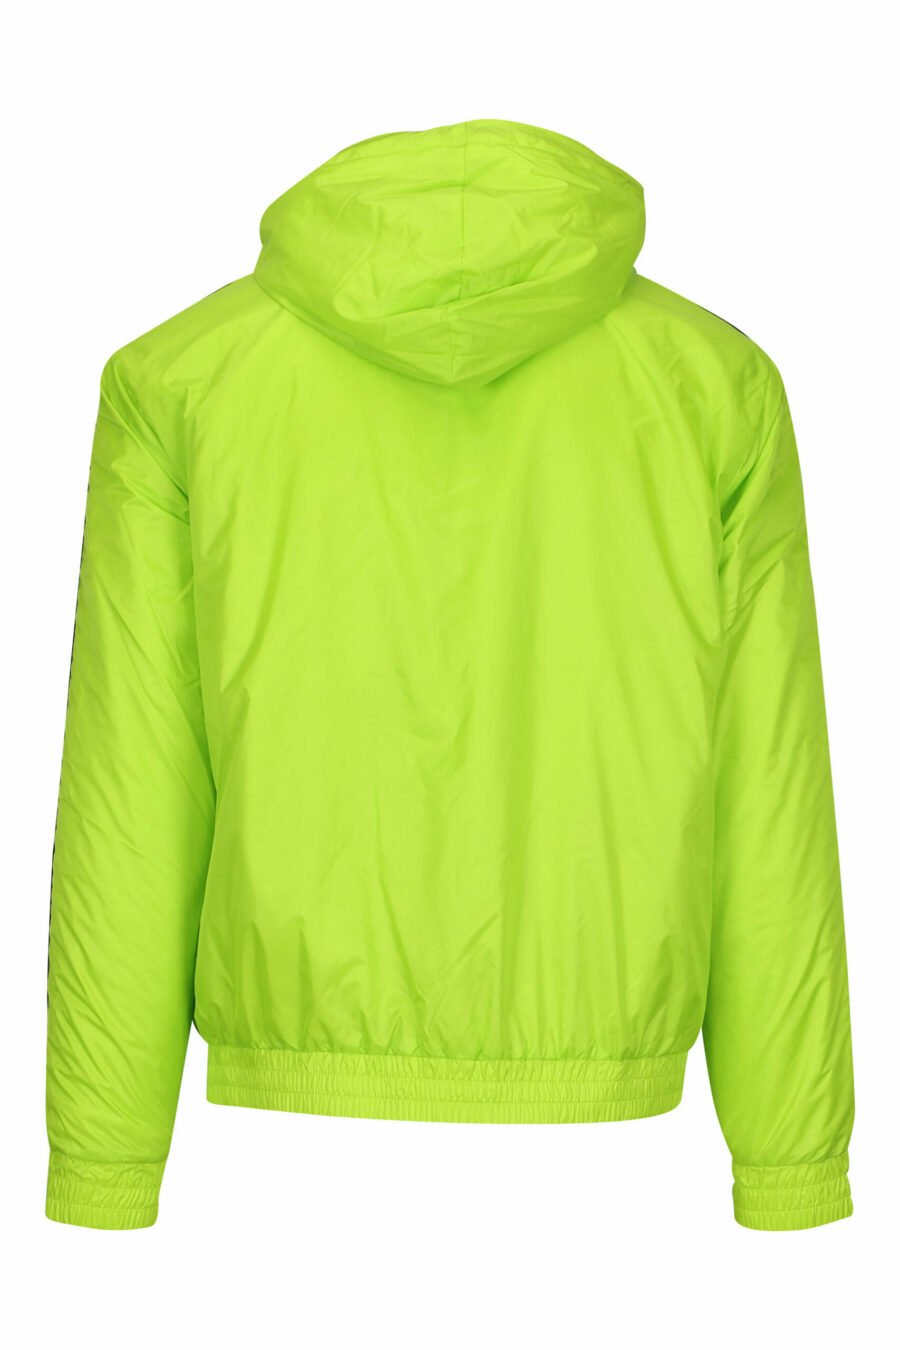 Chaqueta verde lima impermeable con capucha lineas blancas laterales y logo "lux identity" - 8057970709060 1 scaled